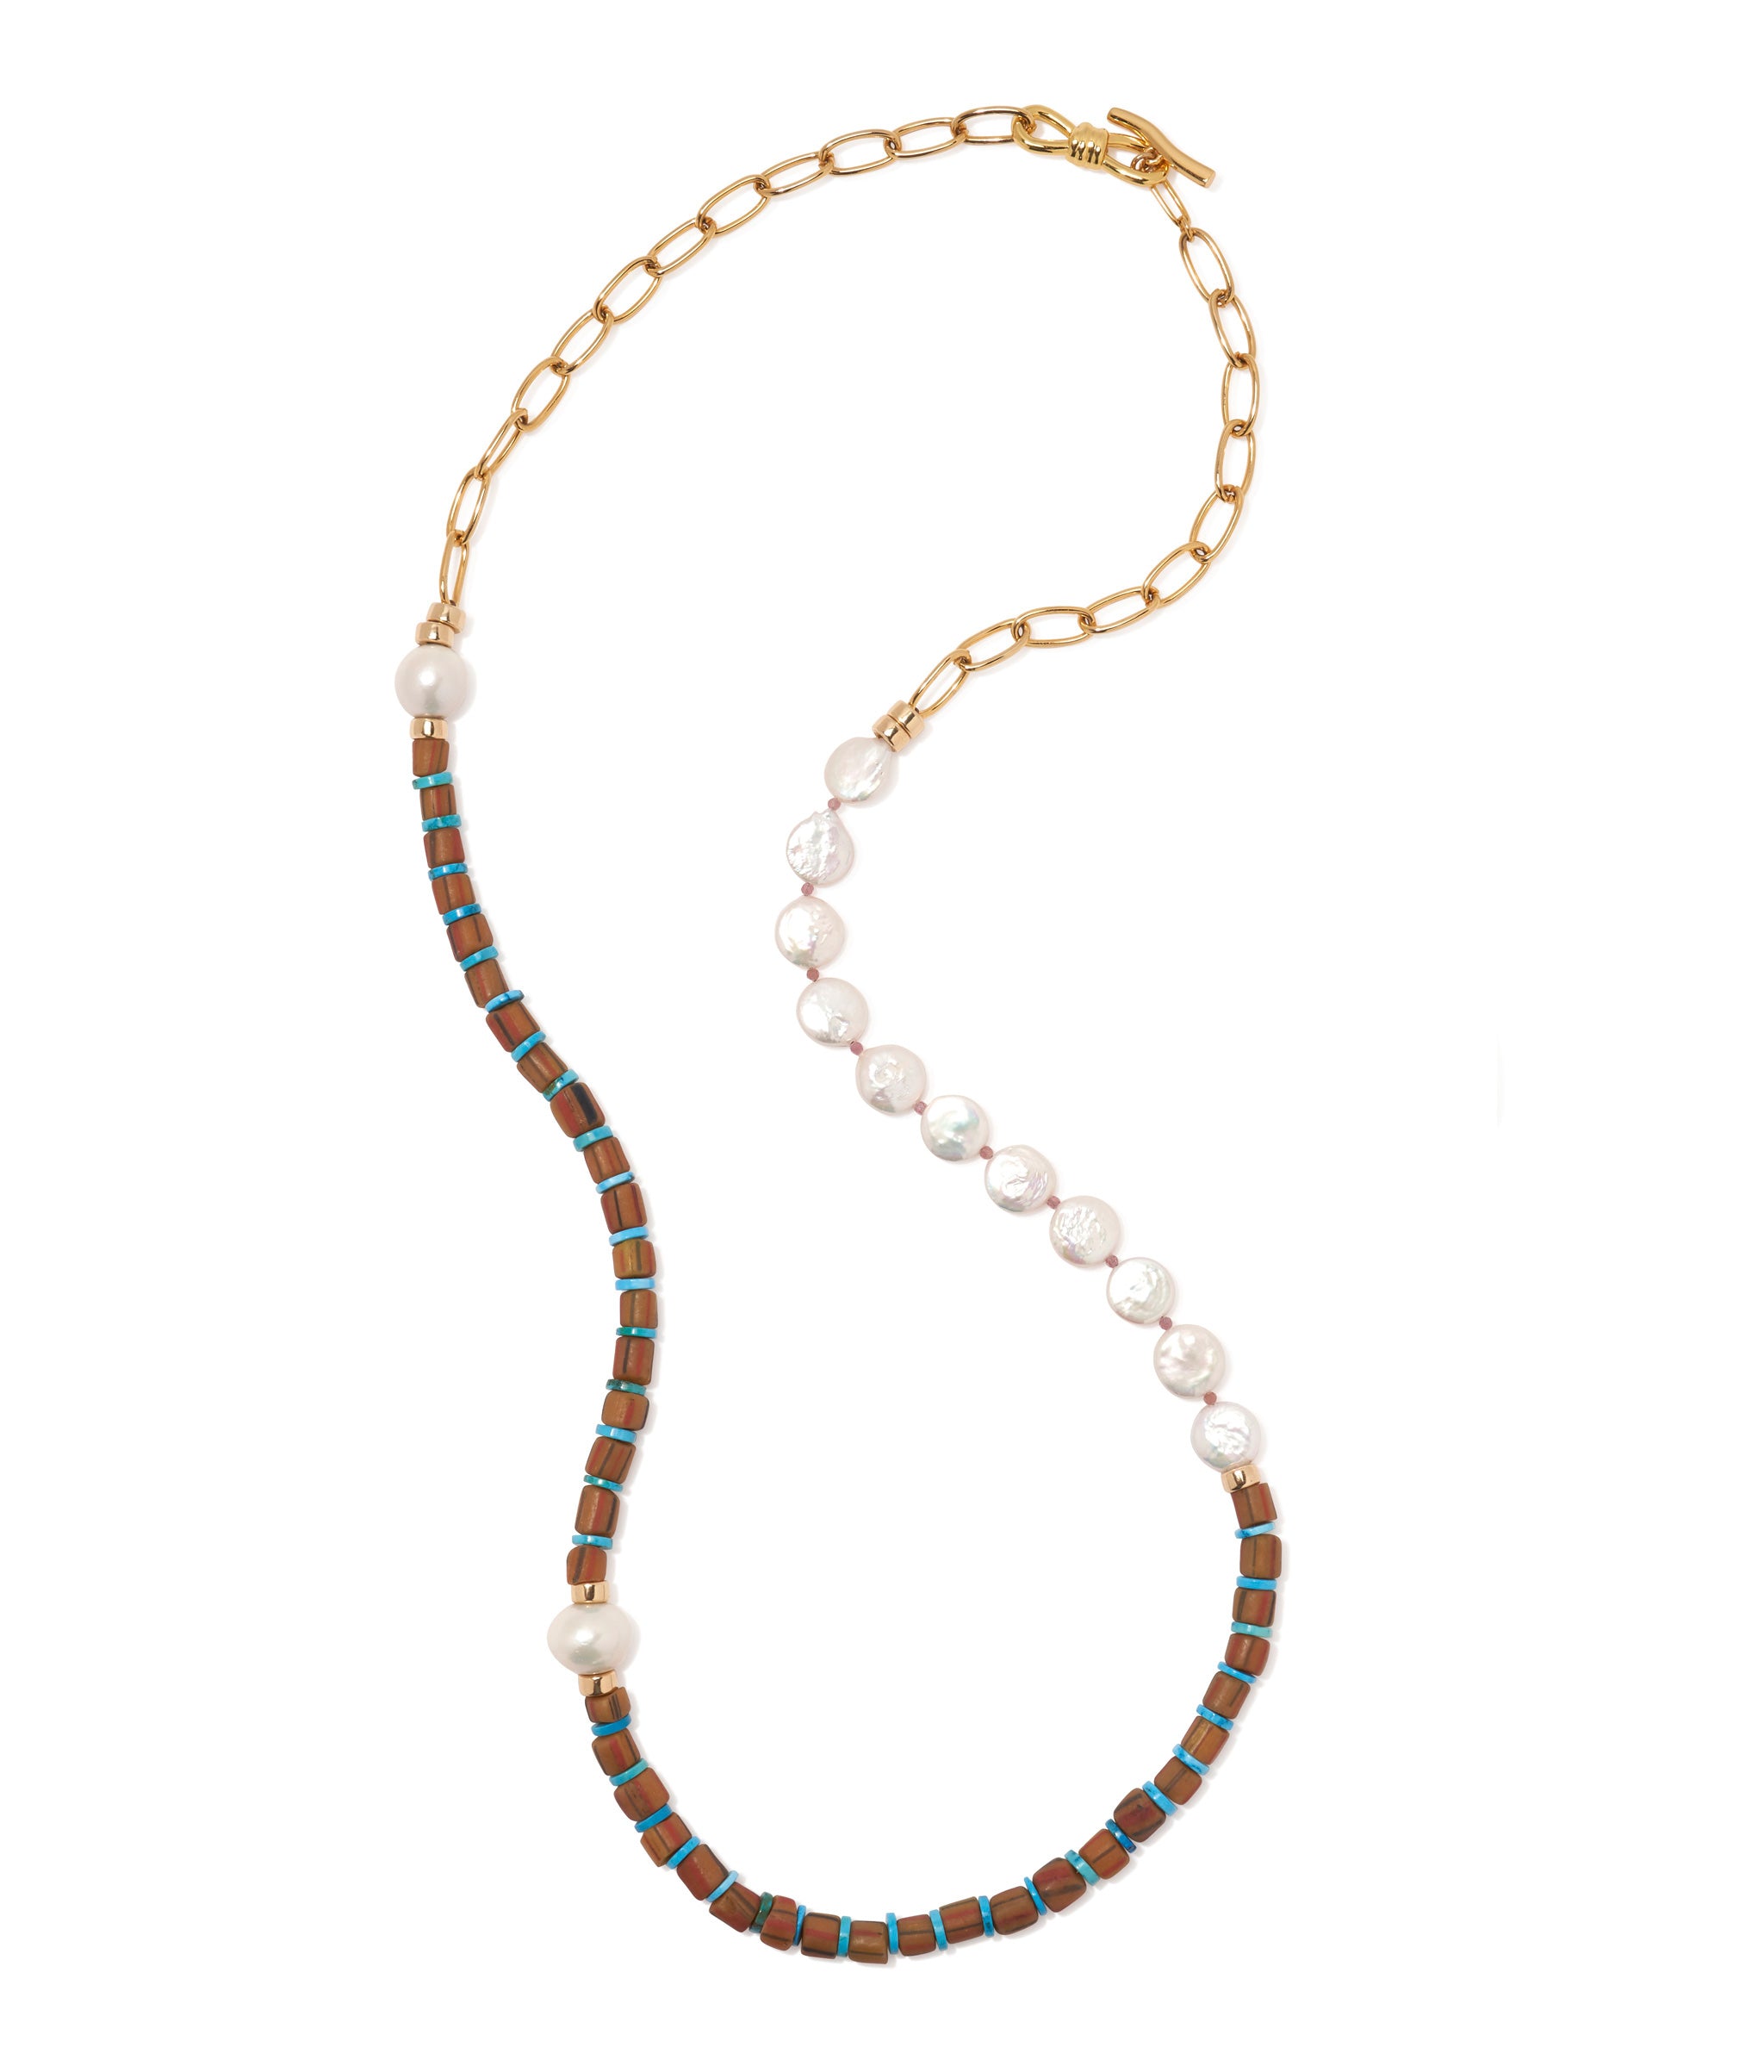 Porto Covo Necklace in Azul. Necklace with freshwater pearls, brown java glass beads, dyed blue howlite. Shown long.